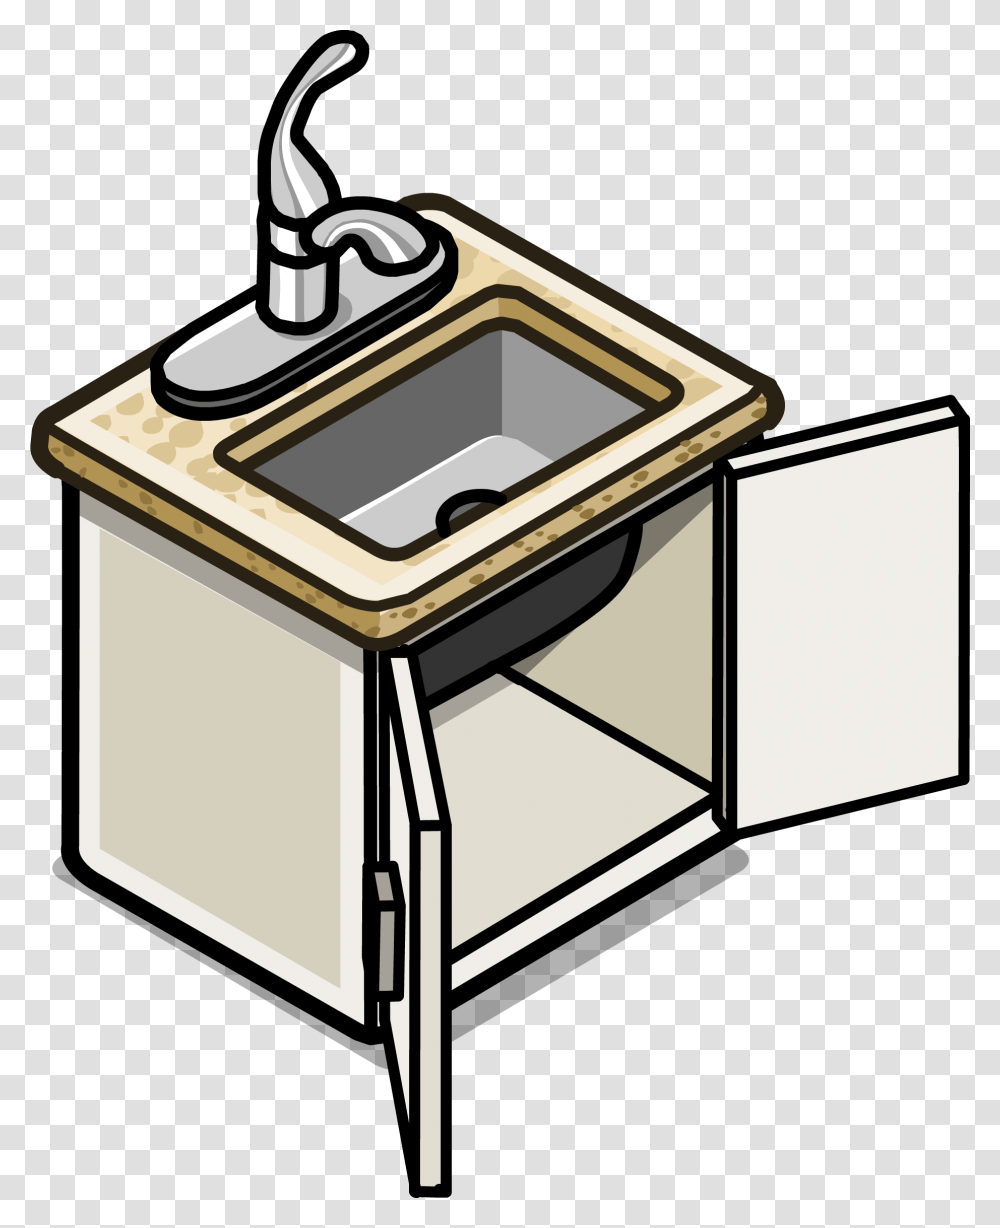 Image, Water, Sink Faucet, Fountain, Drinking Fountain Transparent Png